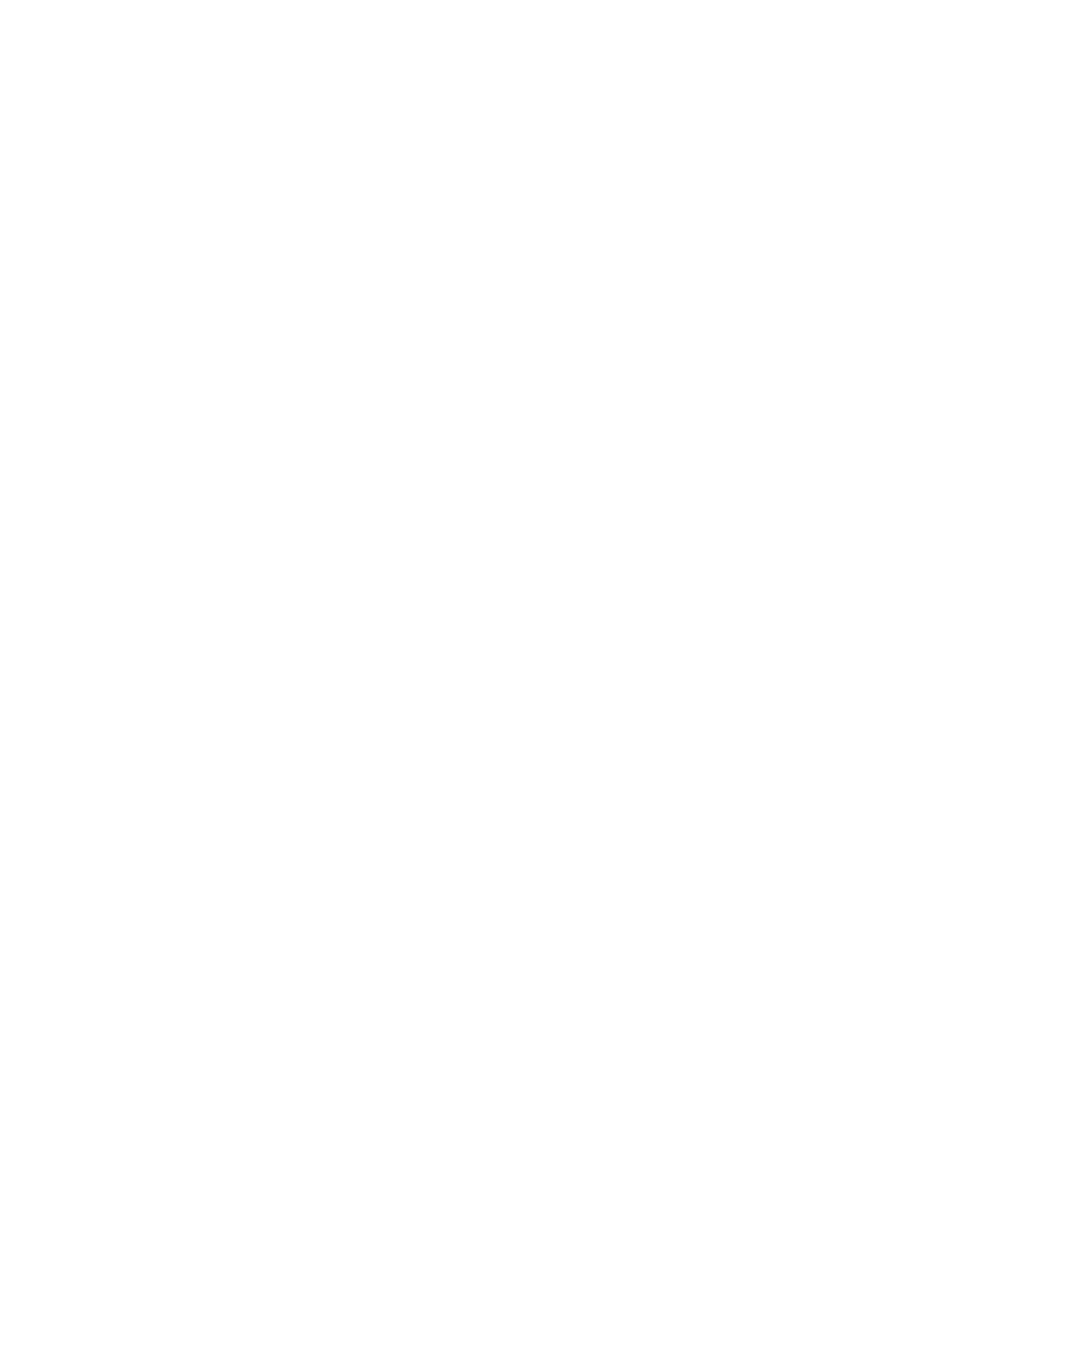 OURSPACE FOUNDATION